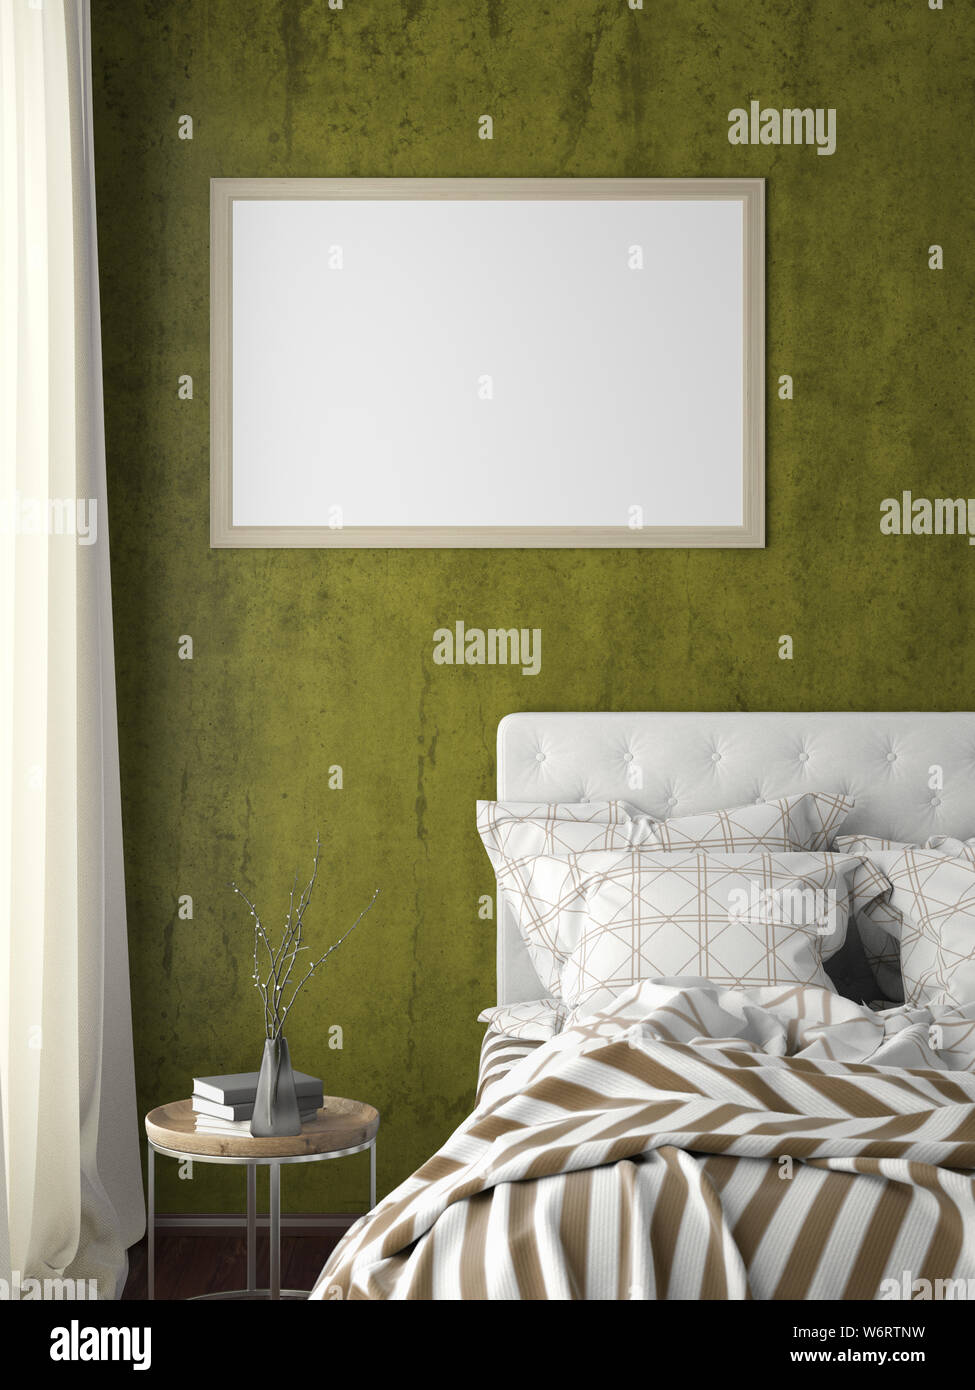 Download Horizontal Poster Frame Mock Up On Yellow Wall In Bedroom 3d Illustration Stock Photo Alamy PSD Mockup Templates